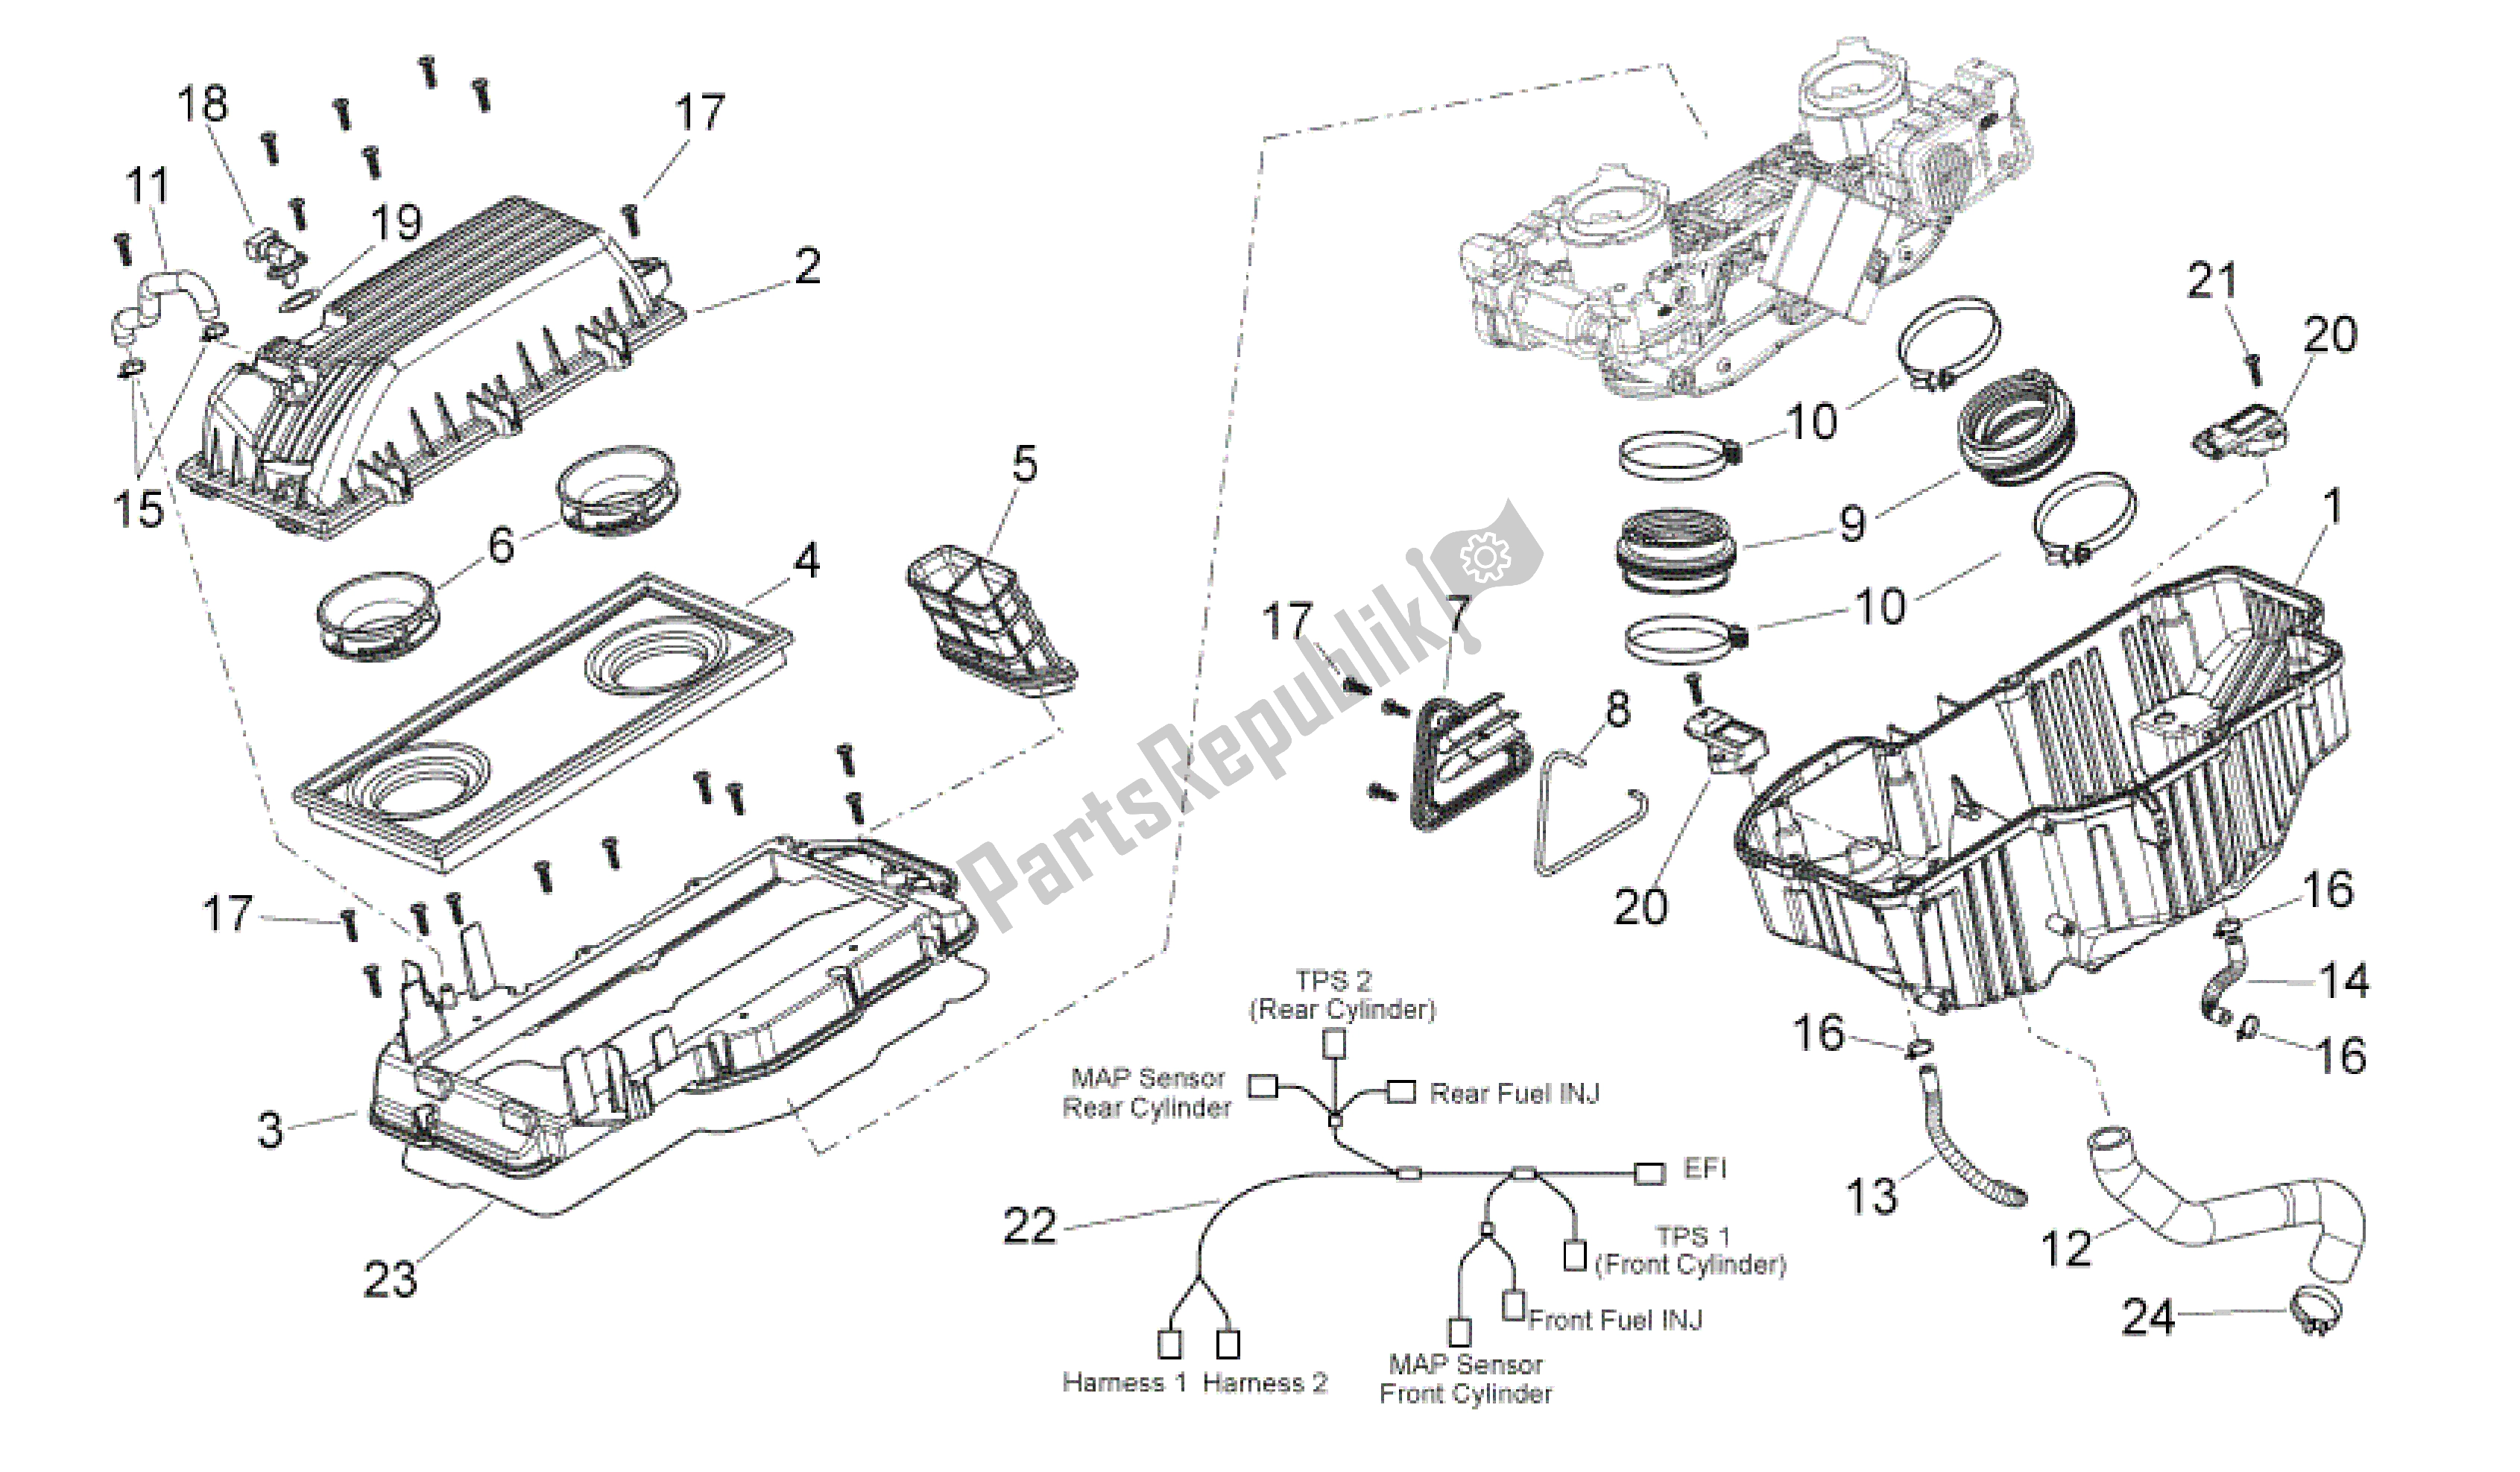 All parts for the Air Box of the Aprilia Shiver 750 2007 - 2009